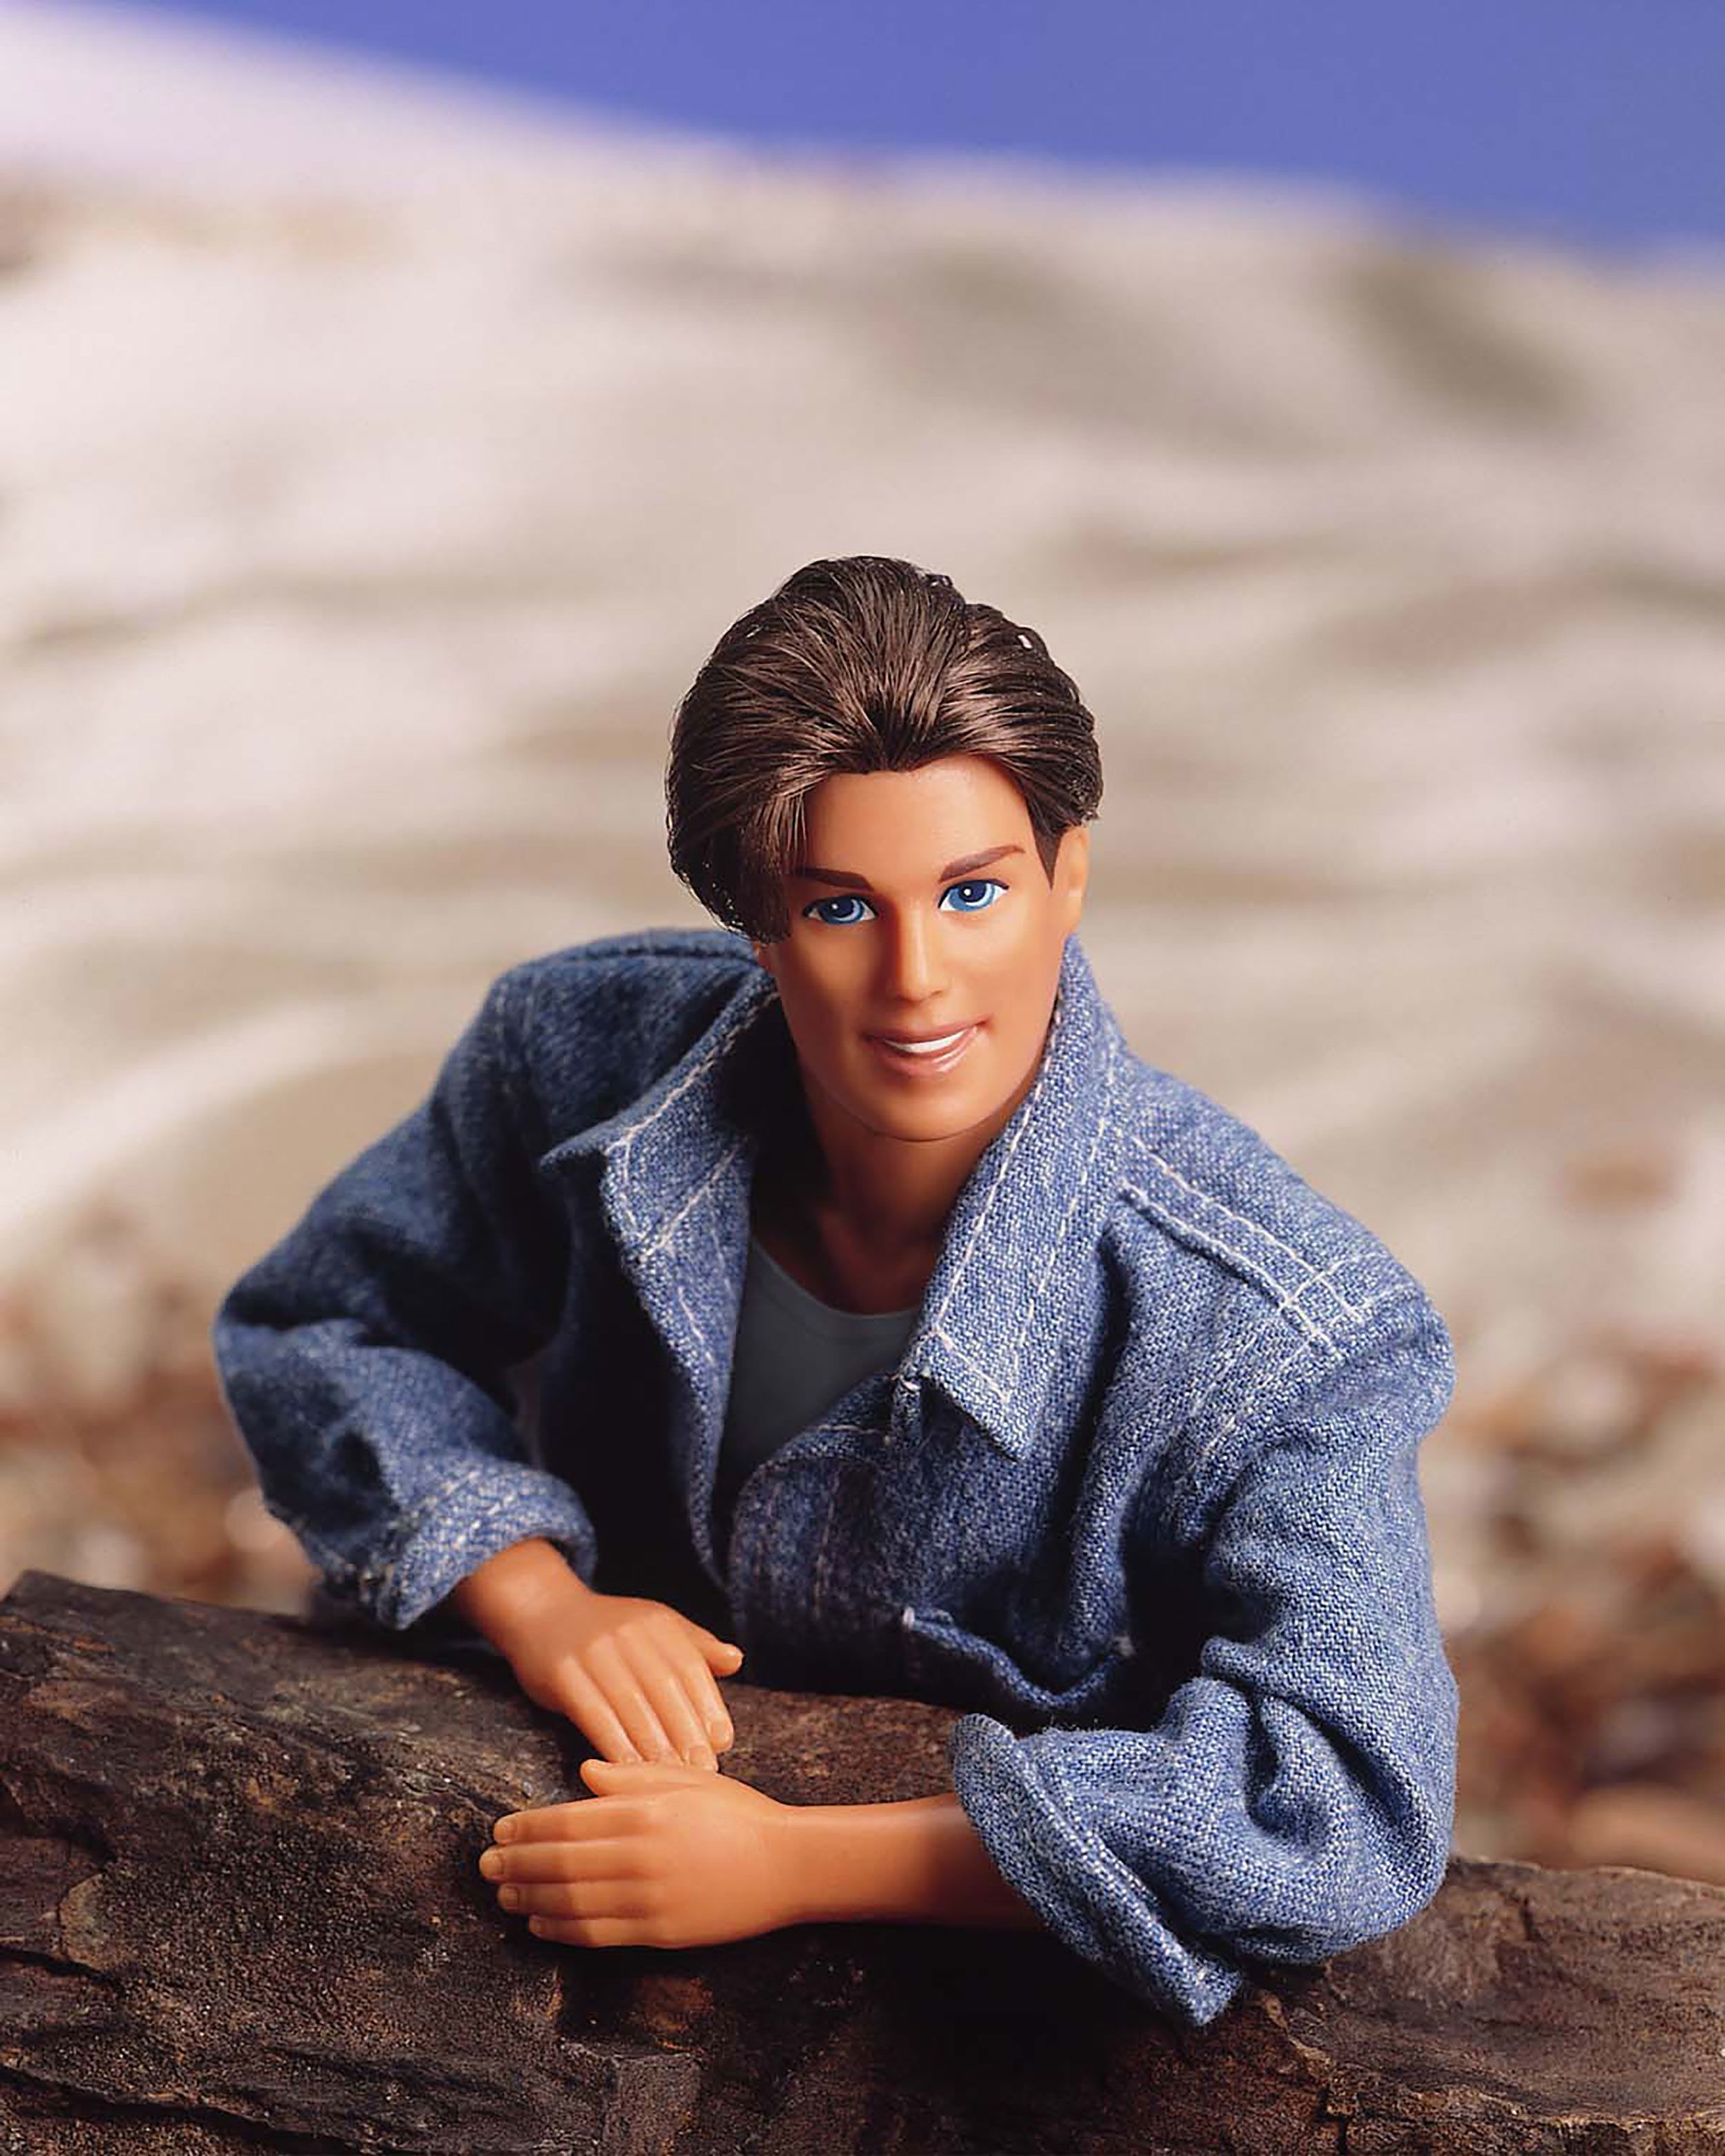 Barbie The Movie Collectible Ken Doll Wearing All-Denim Matching